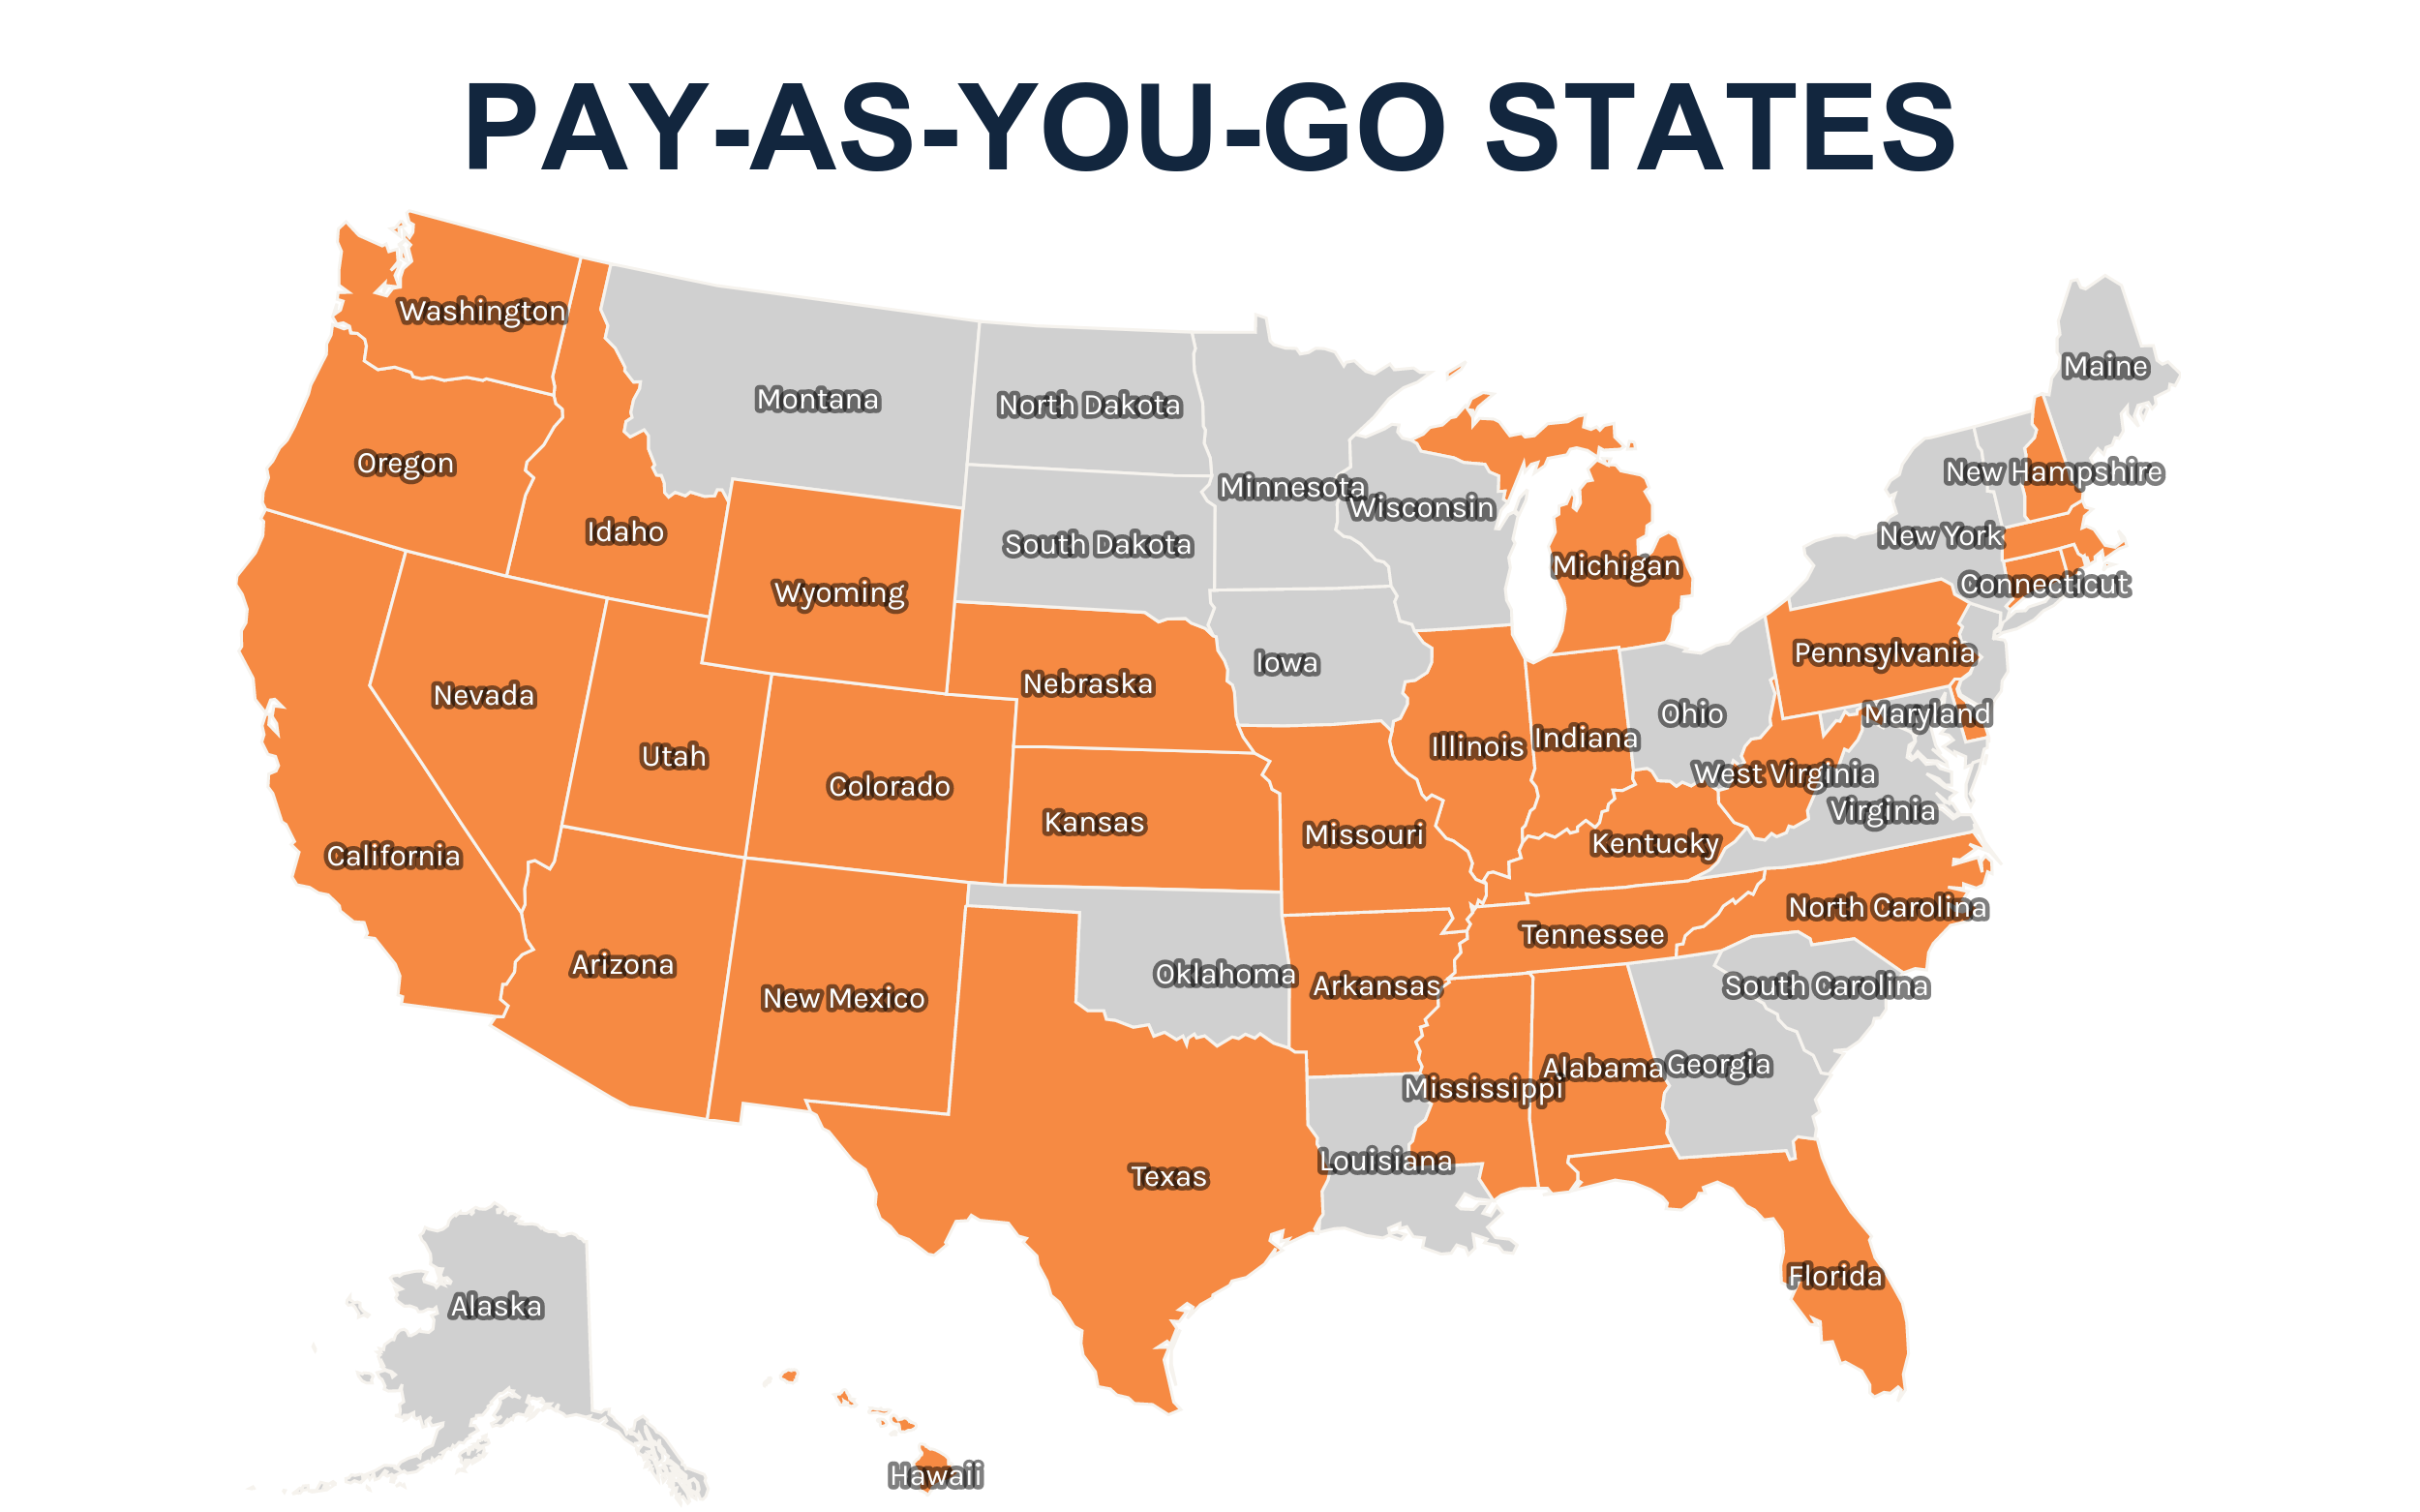 What Are the Sales Tax Advantages of Operating in a Pay-A-You-Go State